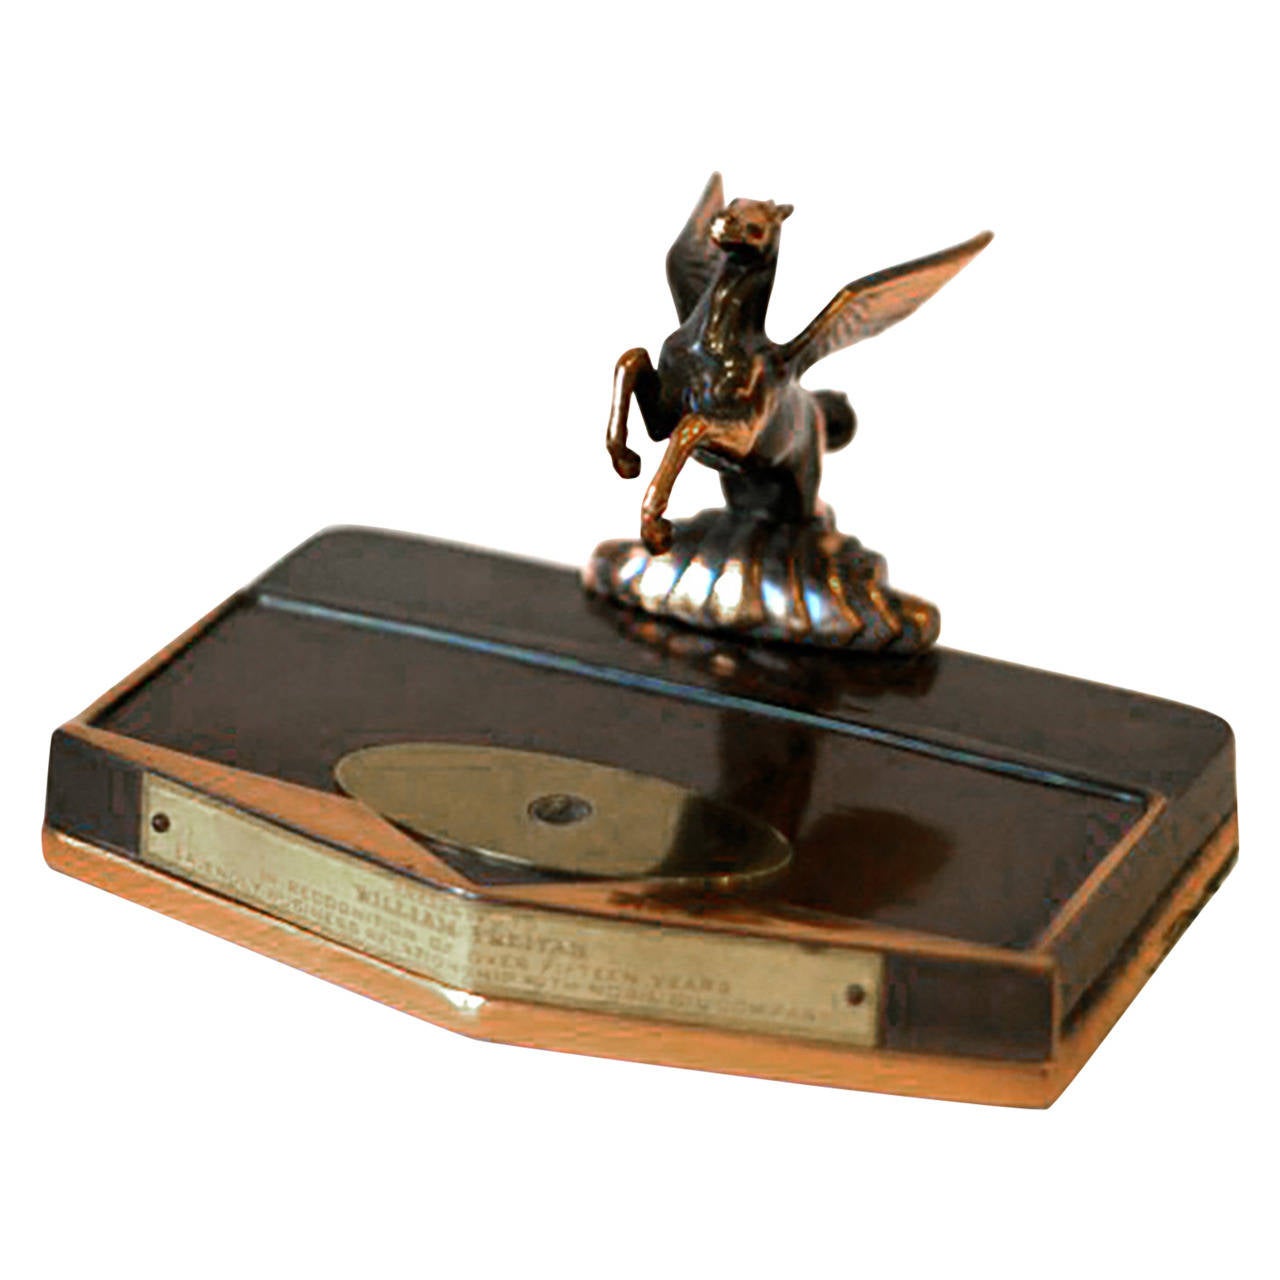 Copper plated Pegasus pen holder with plaque dedication to a business associate of Mobile Oil Company. Circa 1930s.

H:4